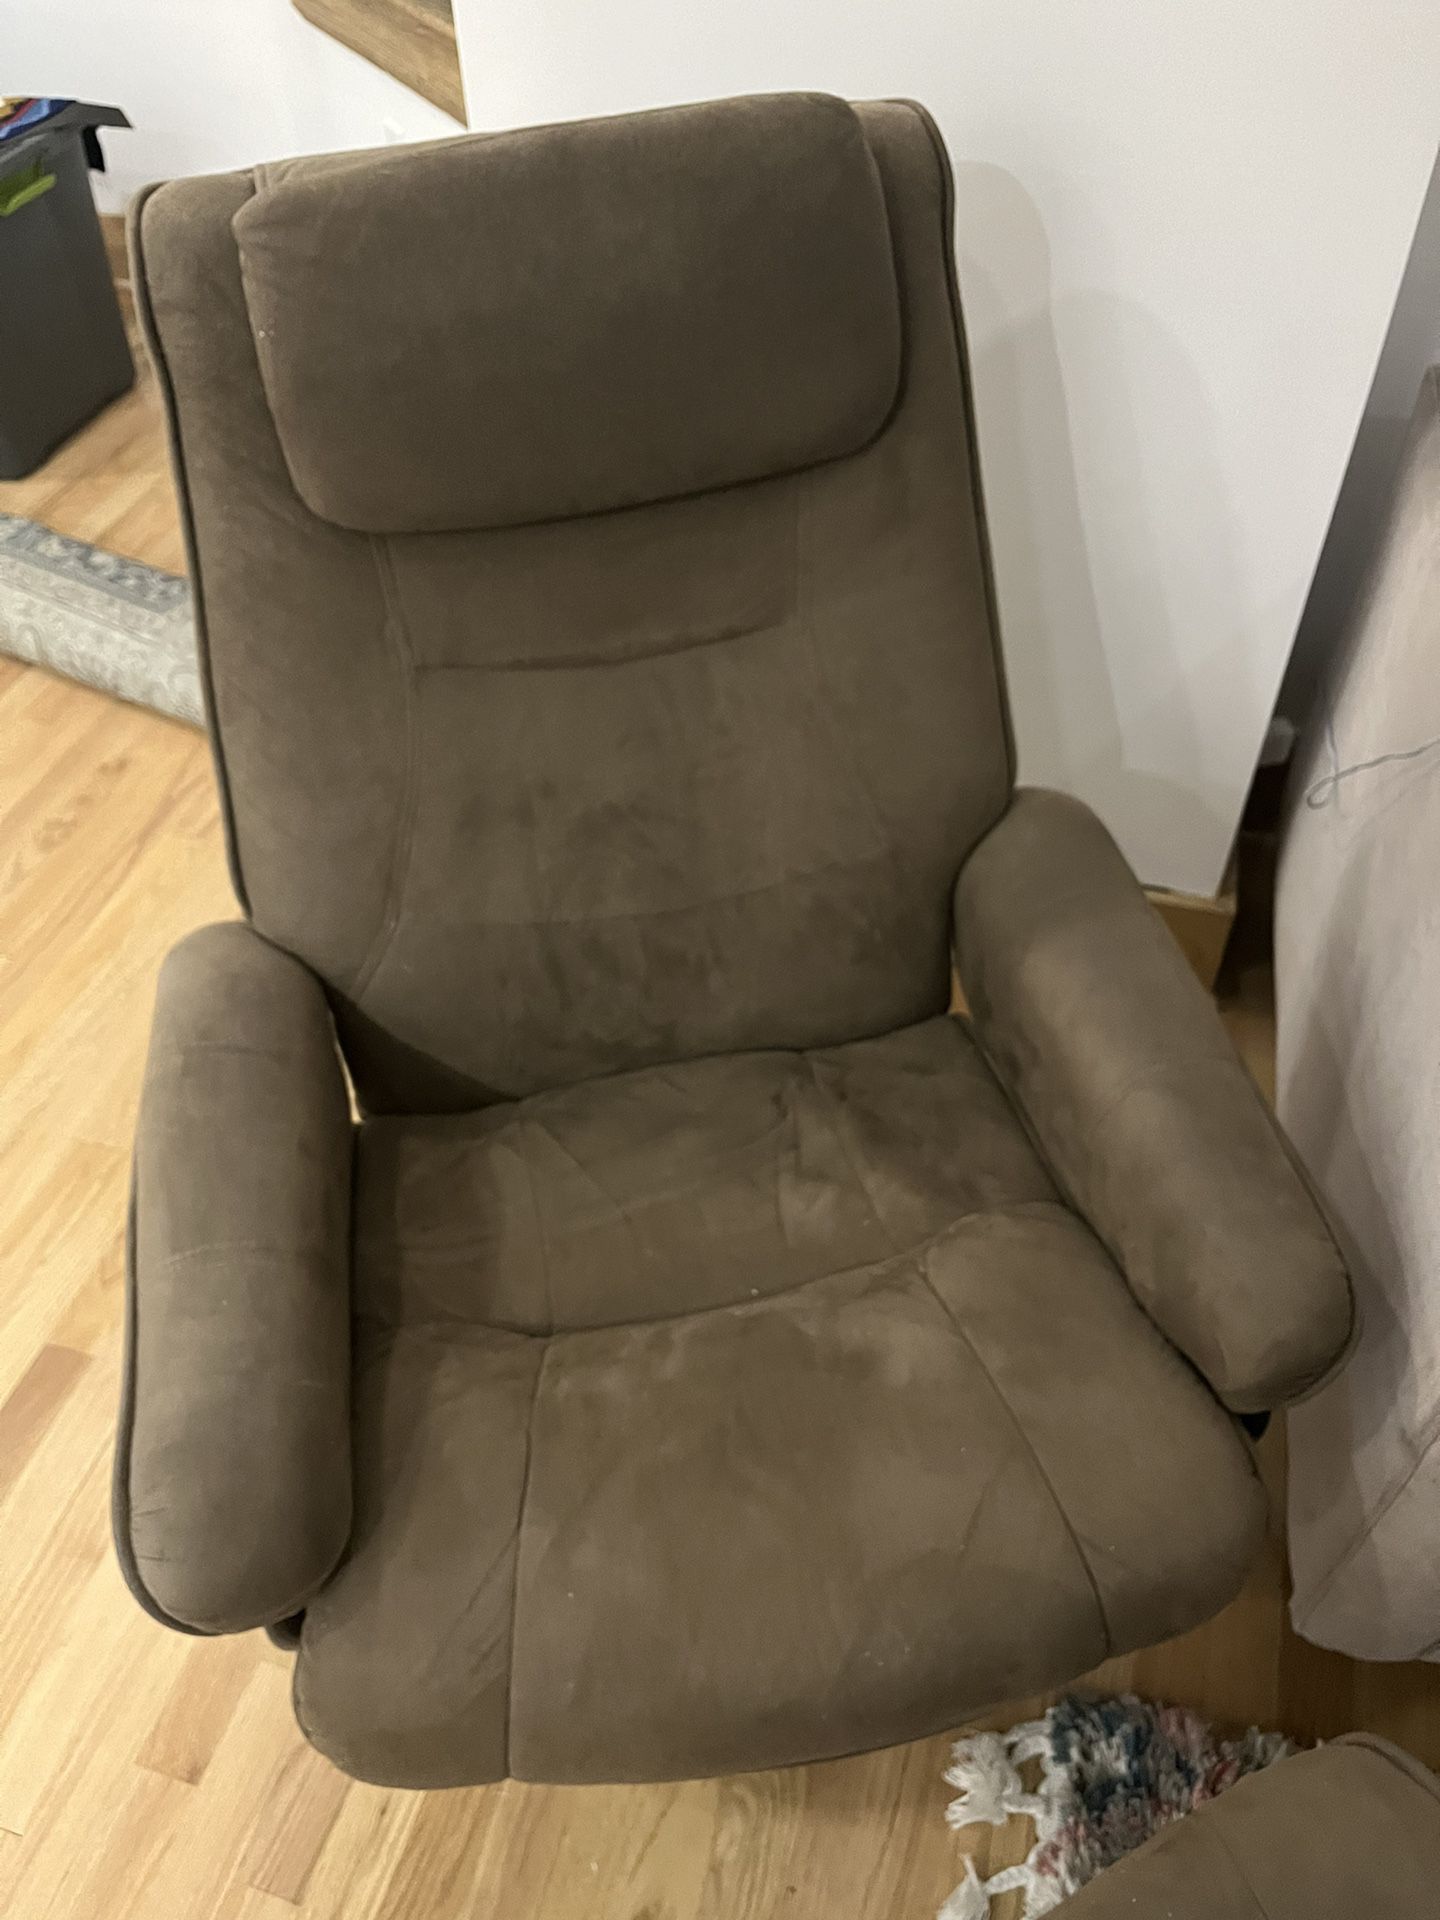 FREE! Brown Fabric Lounge Chair & Foot Rest 